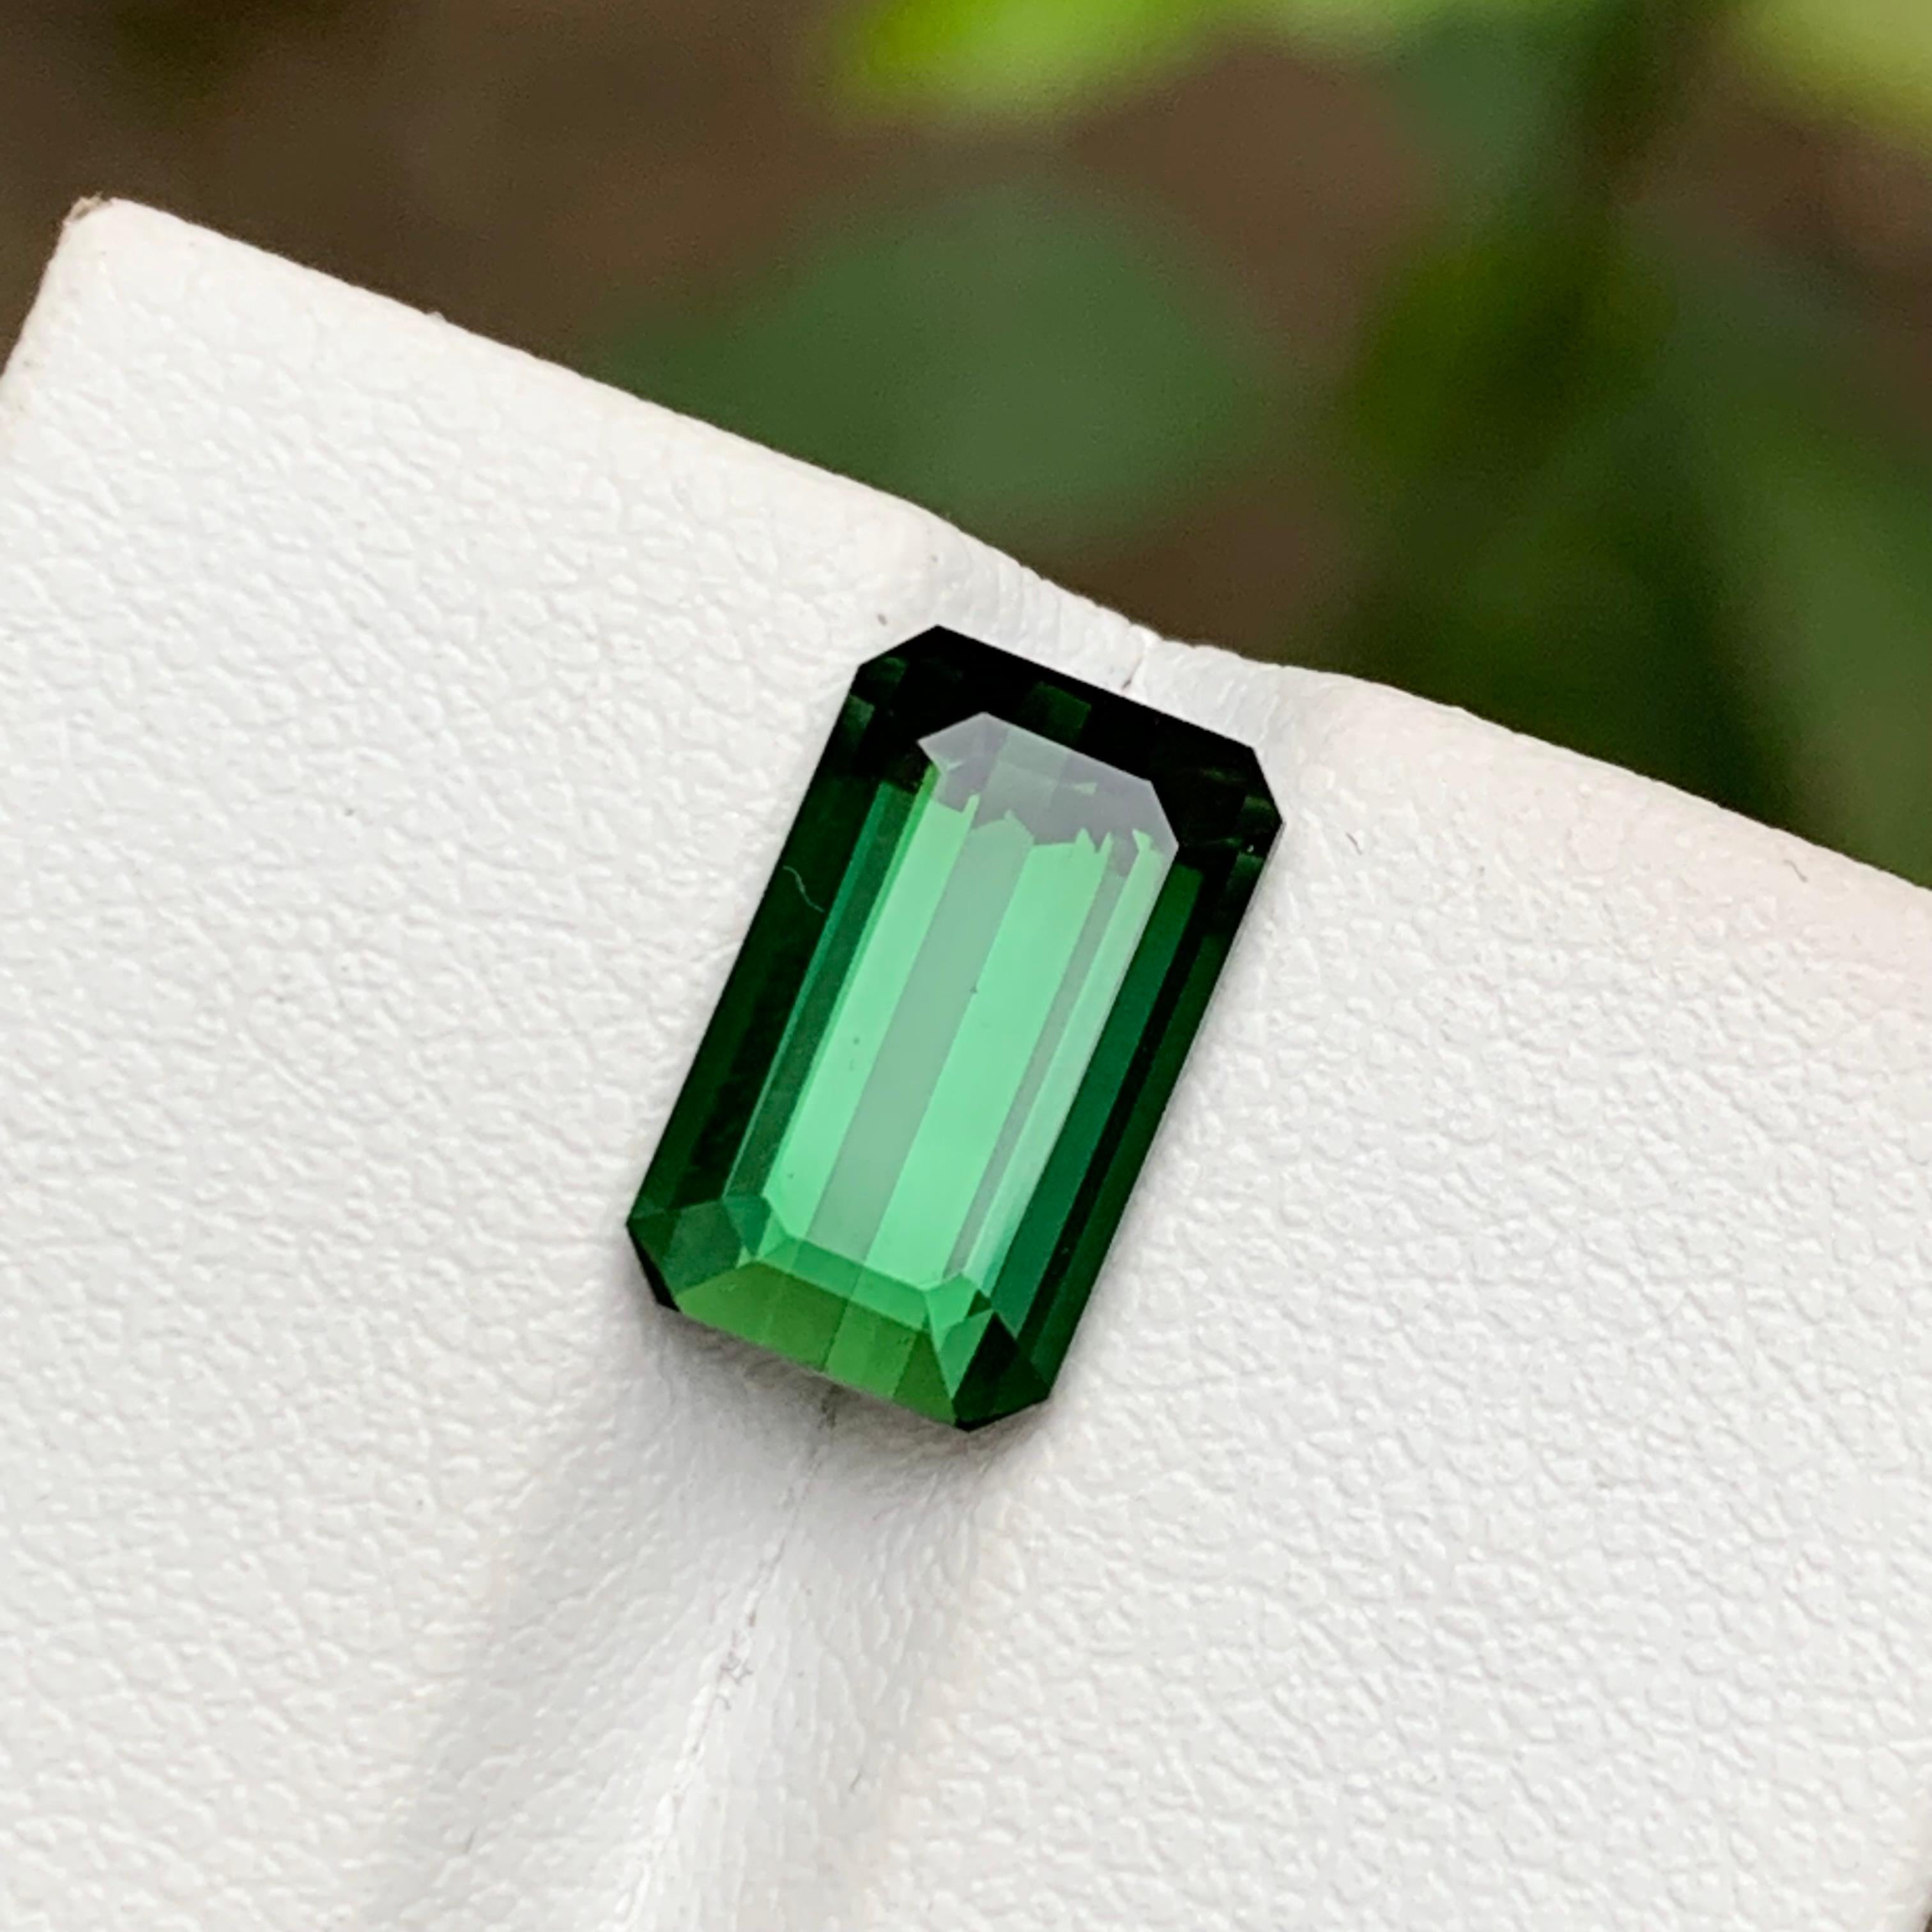 GEMSTONE TYPE: Tourmaline
PIECE(S): 1
WEIGHT: 3.75 Carats
SHAPE: Emerald 
SIZE (MM): 11.25 x 6.93 x 5.39
COLOR: Deep Green 
CLARITY: Eye Clean
TREATMENT: None
ORIGIN: Afghanistan 🇦🇫 
CERTIFICATE: On demand
(if you require a certificate, kindly